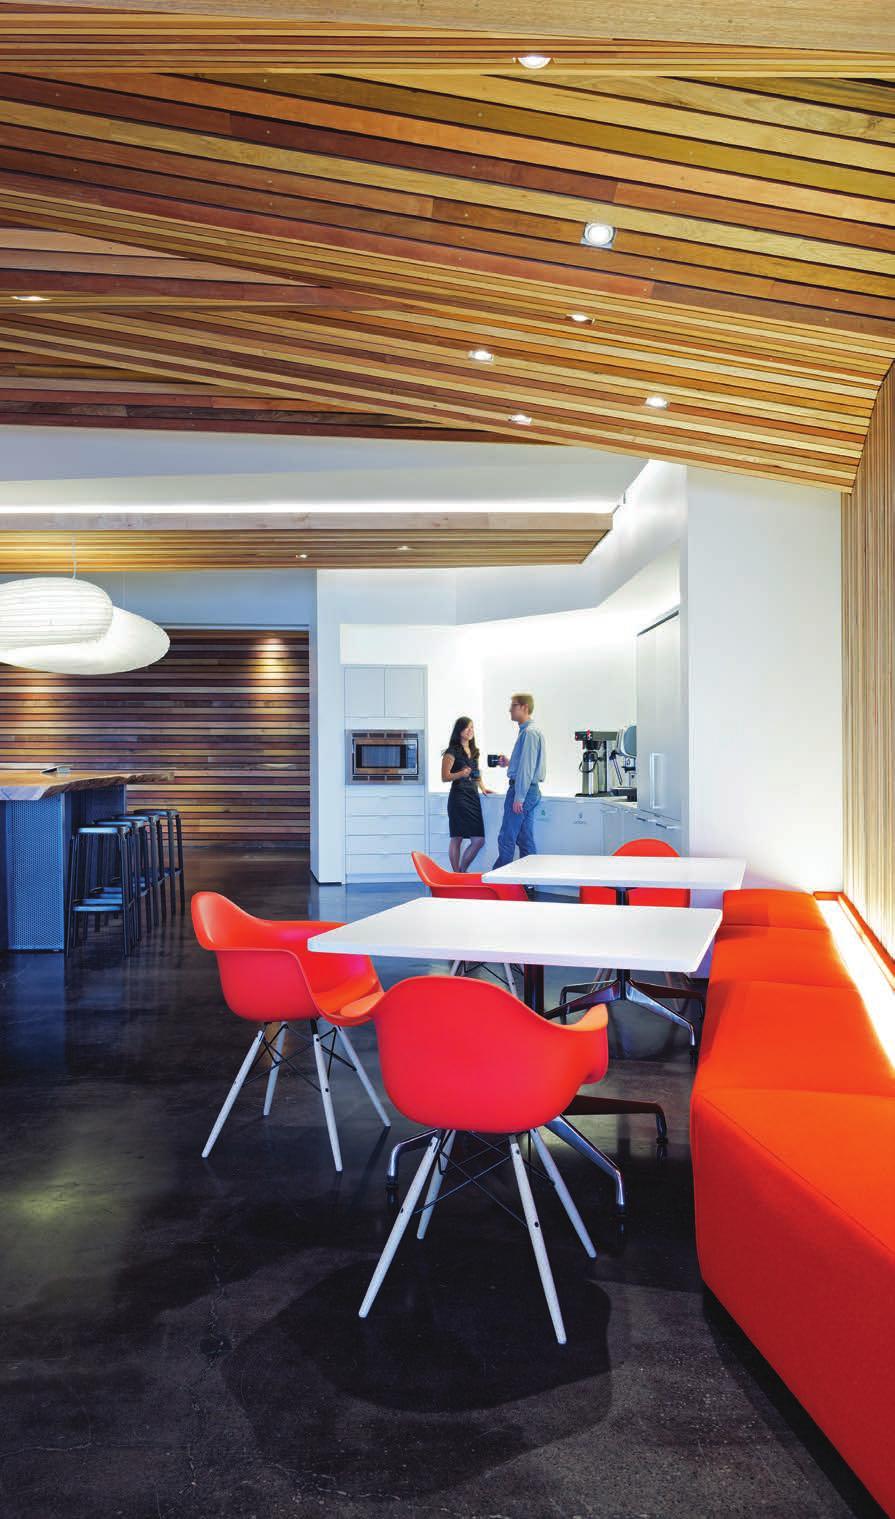 GOLDEN GATE VIEW Autodesk asked the design team to create a space that emphasized their downtown San Francisco location.